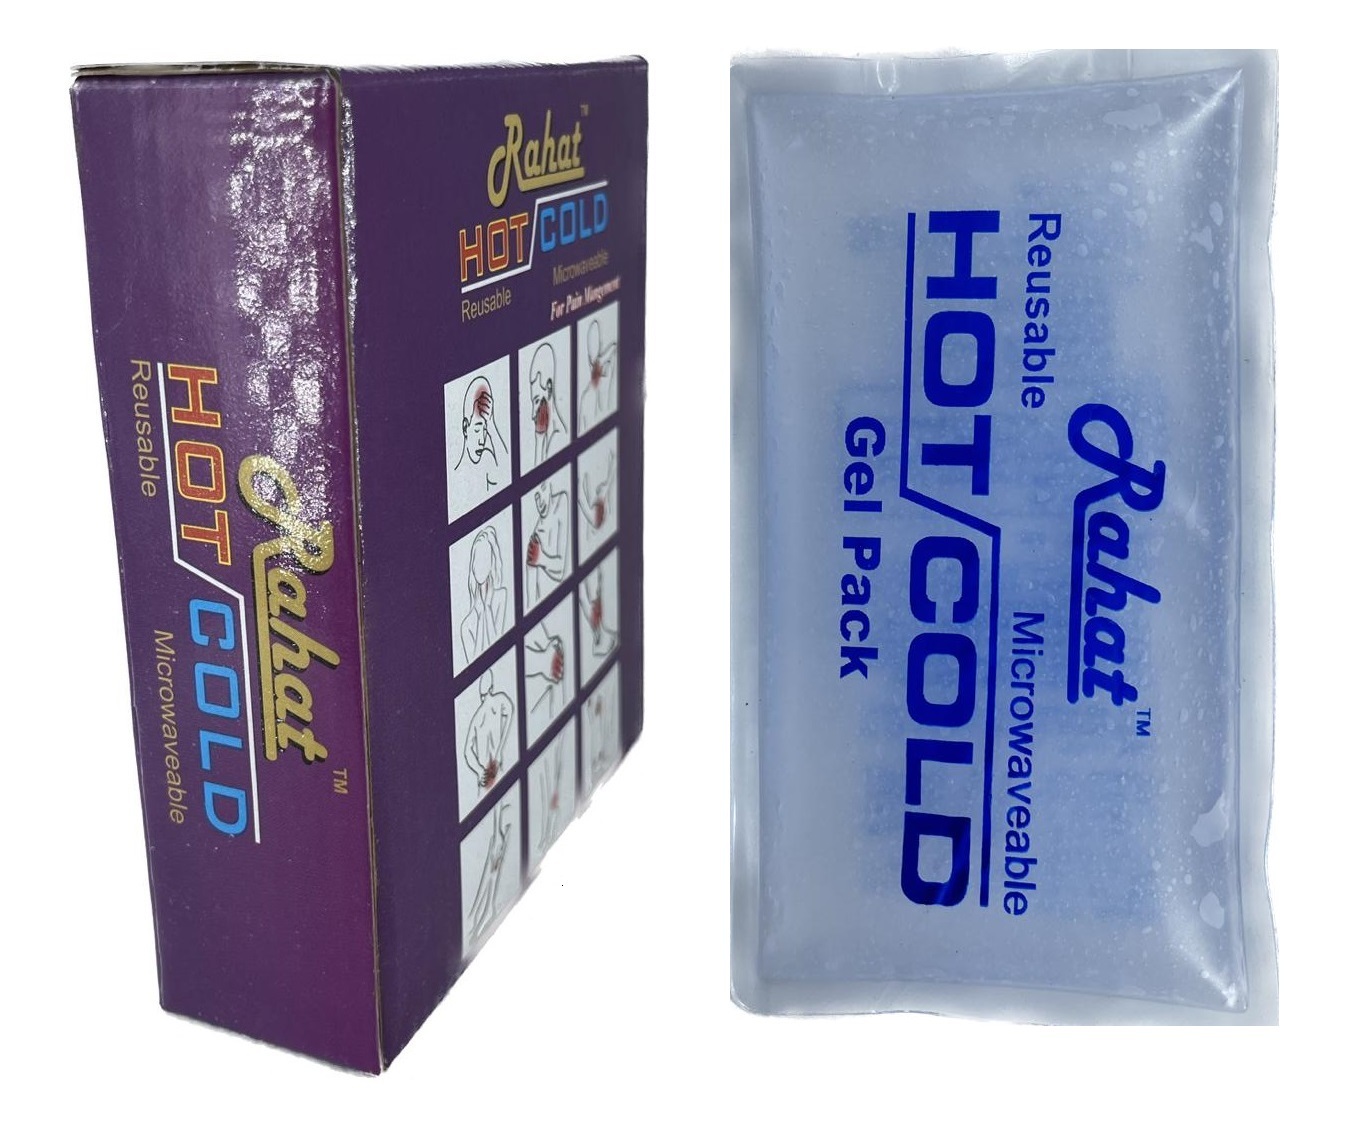 Rahat Hot Cold Compress Pack